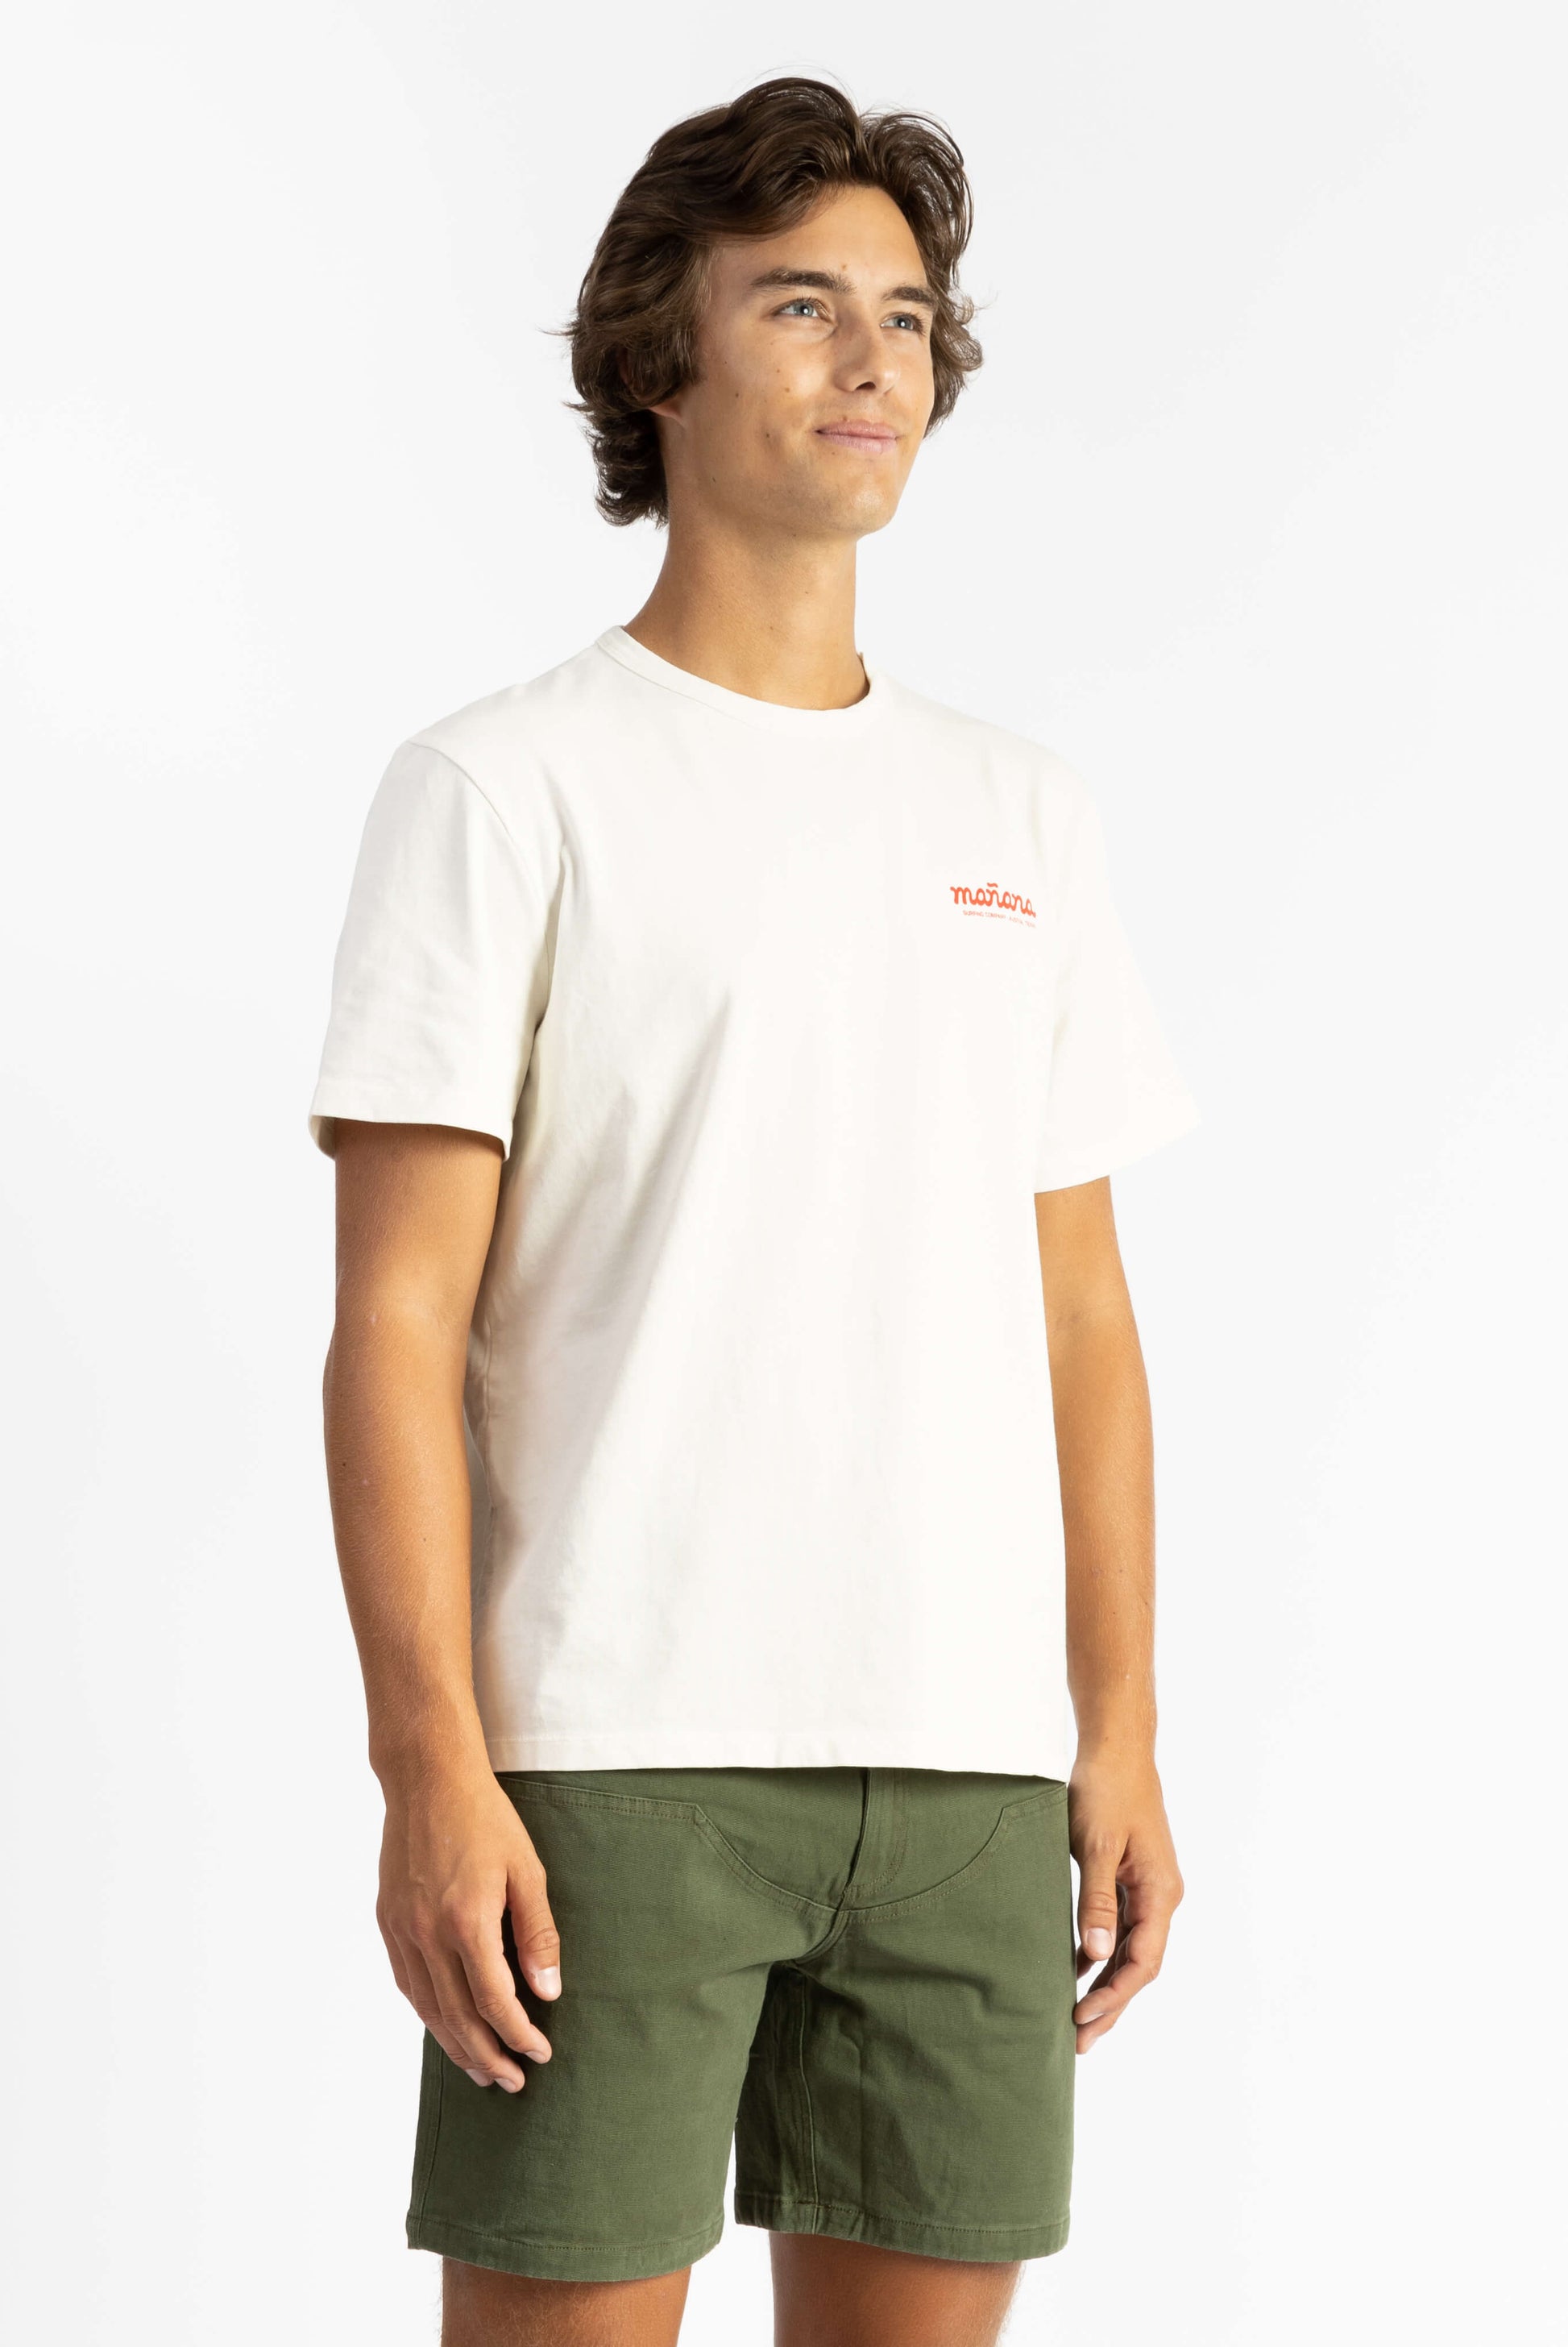 picture of a man wearing an off-white tee shirt with manana branding and green shorts